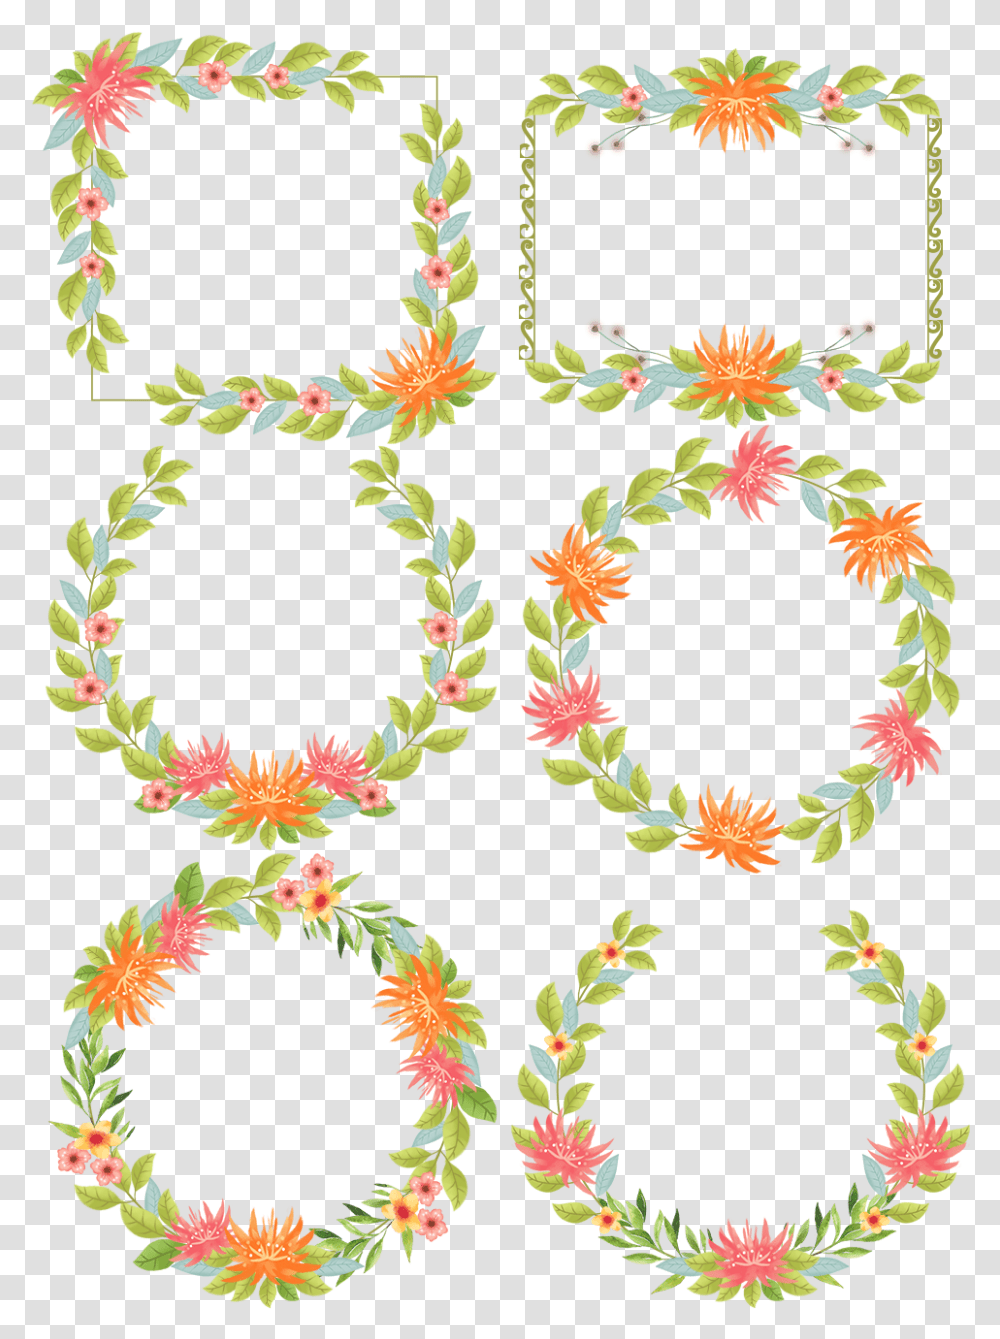 Download Cartoon Plant Flower Border And Psd Floral Plant Border Design, Pattern, Floral Design, Graphics, Text Transparent Png